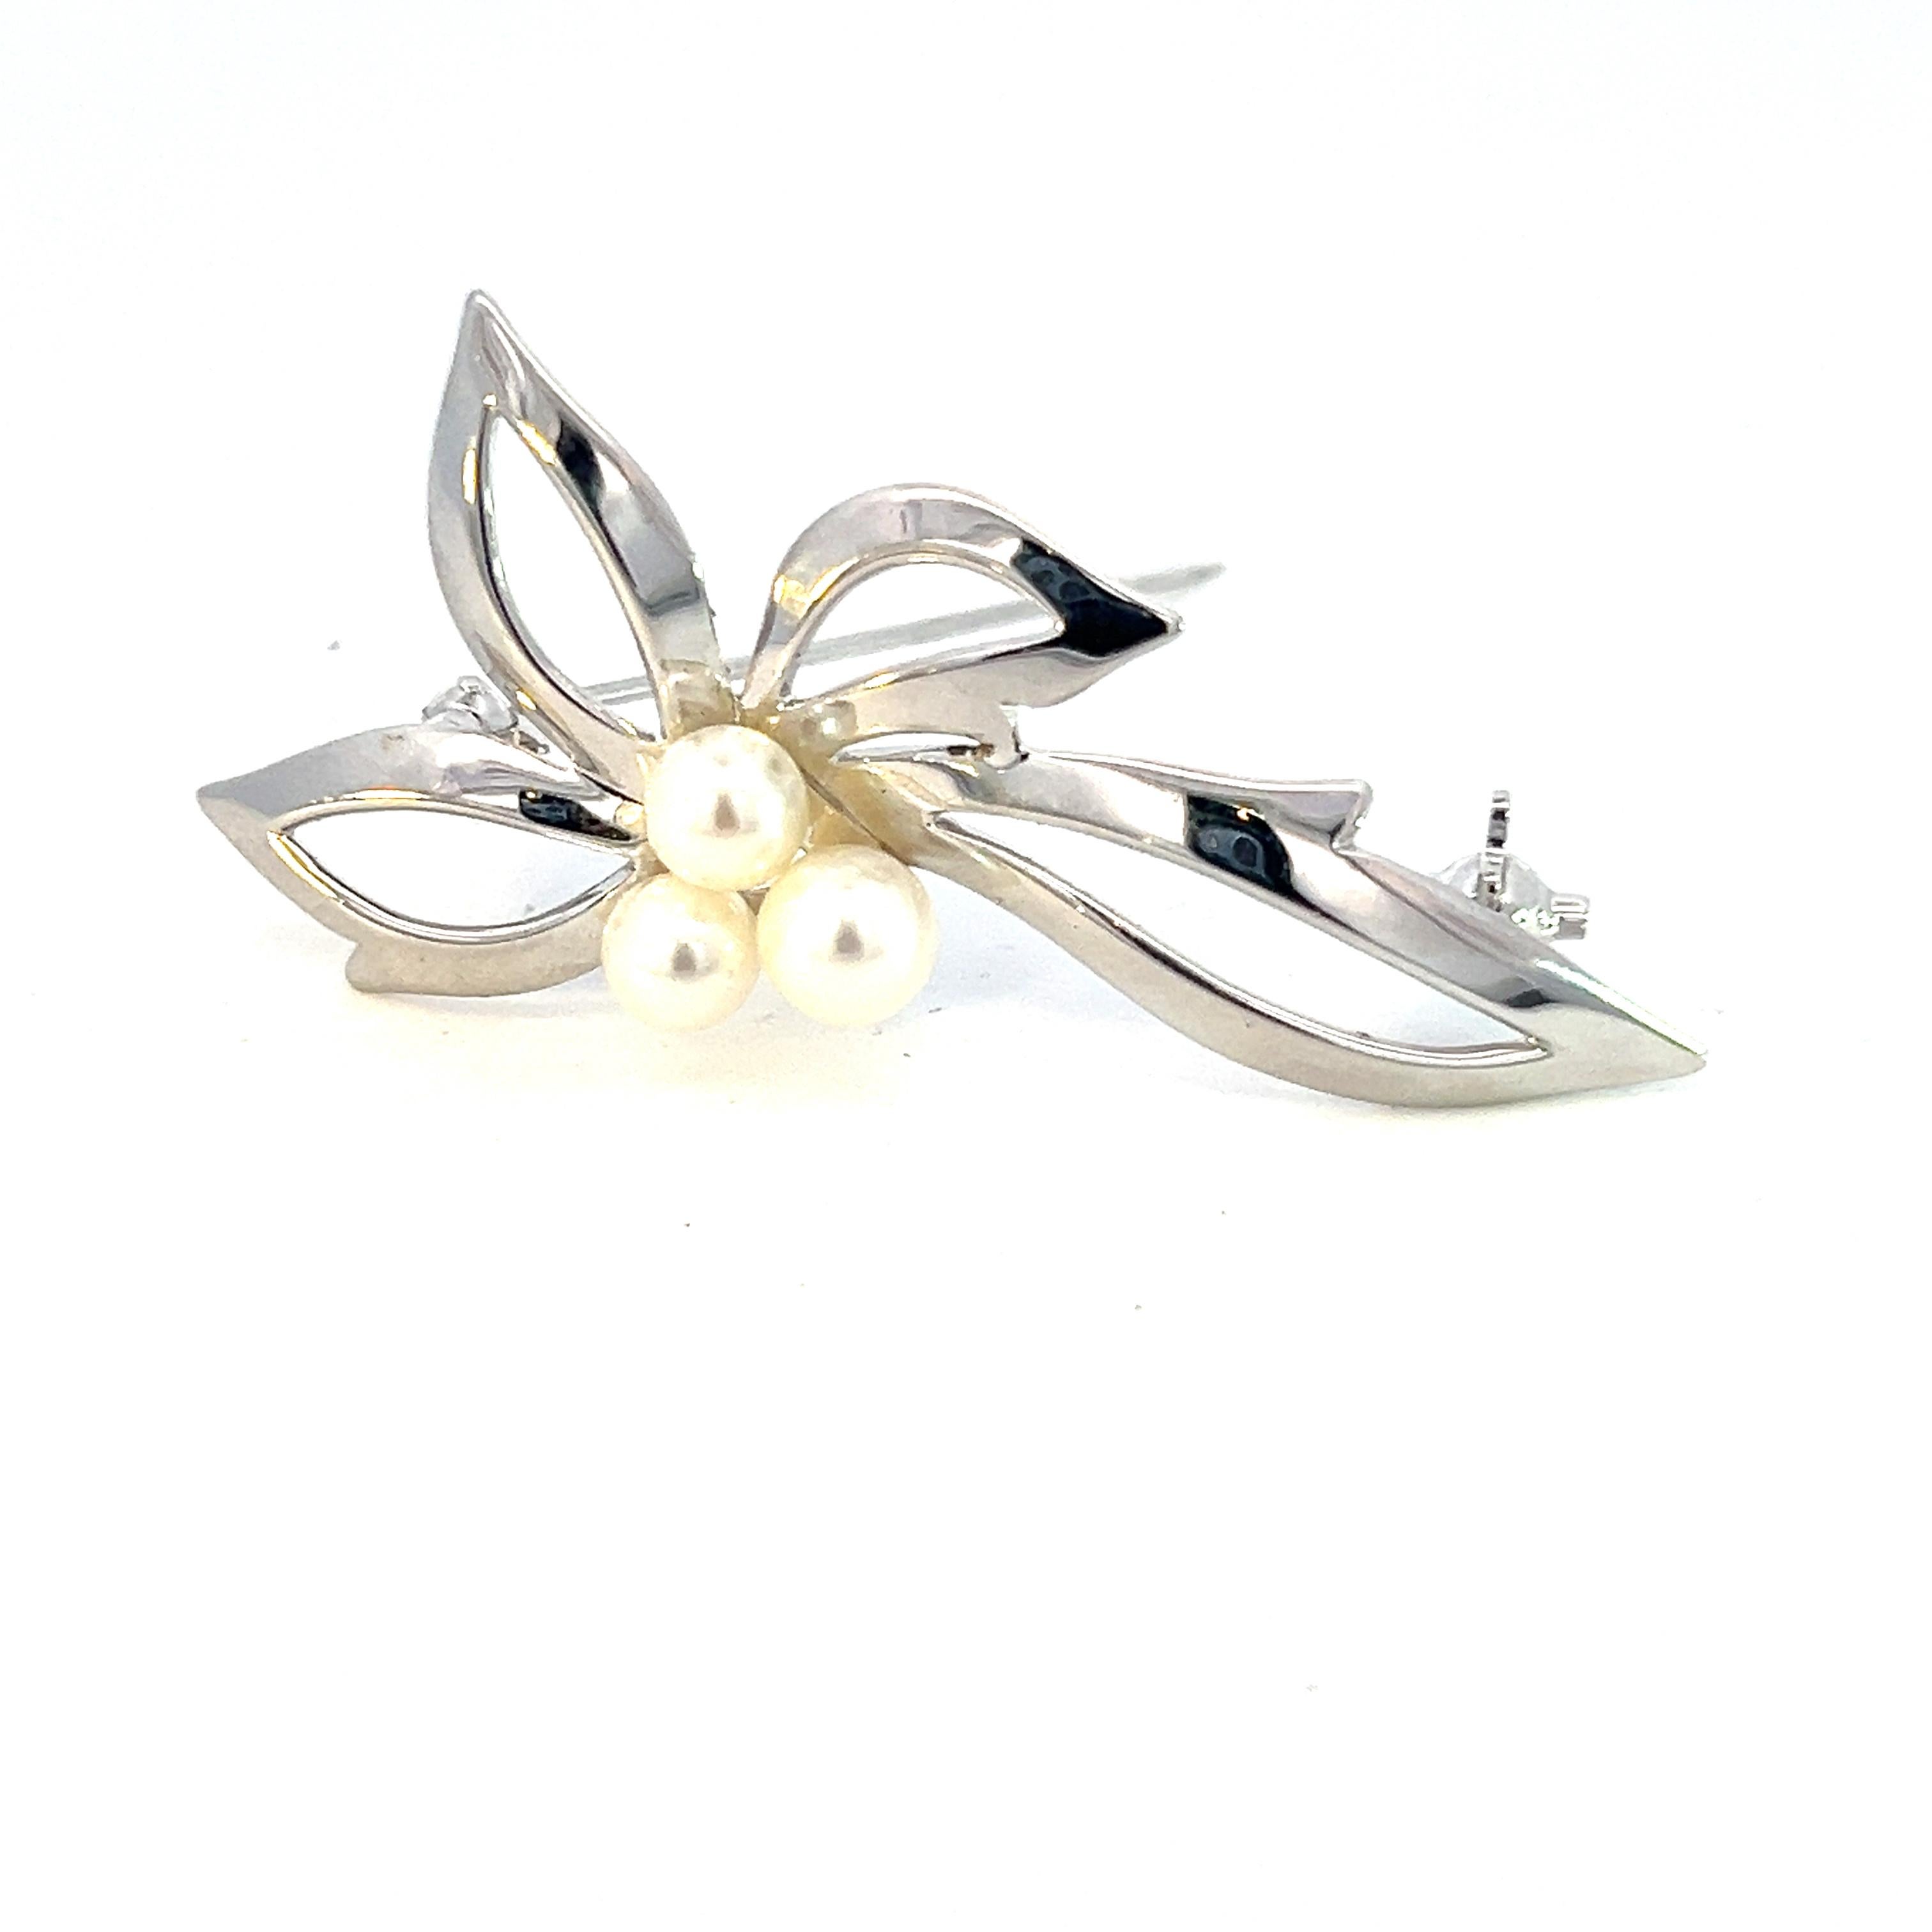 Mikimoto Estate Akoya Pearl Brooch Silver 5 mm M357

This elegant Authentic Mikimoto Estate sterling silver brooch has 3 Saltwater Akoya Cultured Pearls.

TRUSTED SELLER SINCE 2002

PLEASE SEE OUR HUNDREDS OF POSITIVE FEEDBACKS FROM OUR